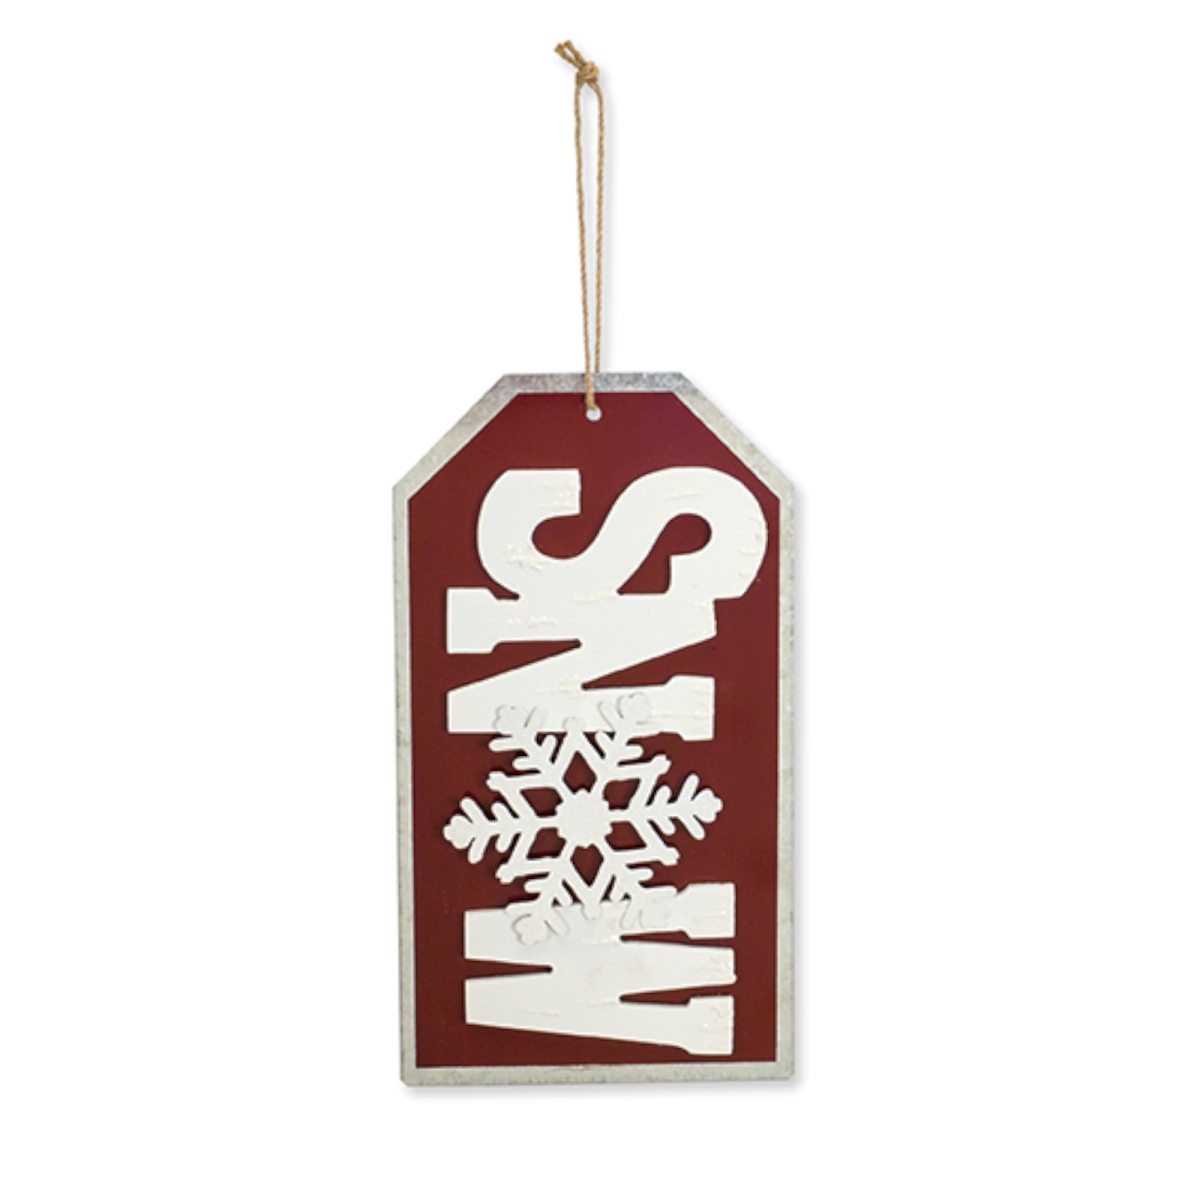 73178ds 11.25 In. Mdf Snow Tag Ornament, White & Red - Set Of 4